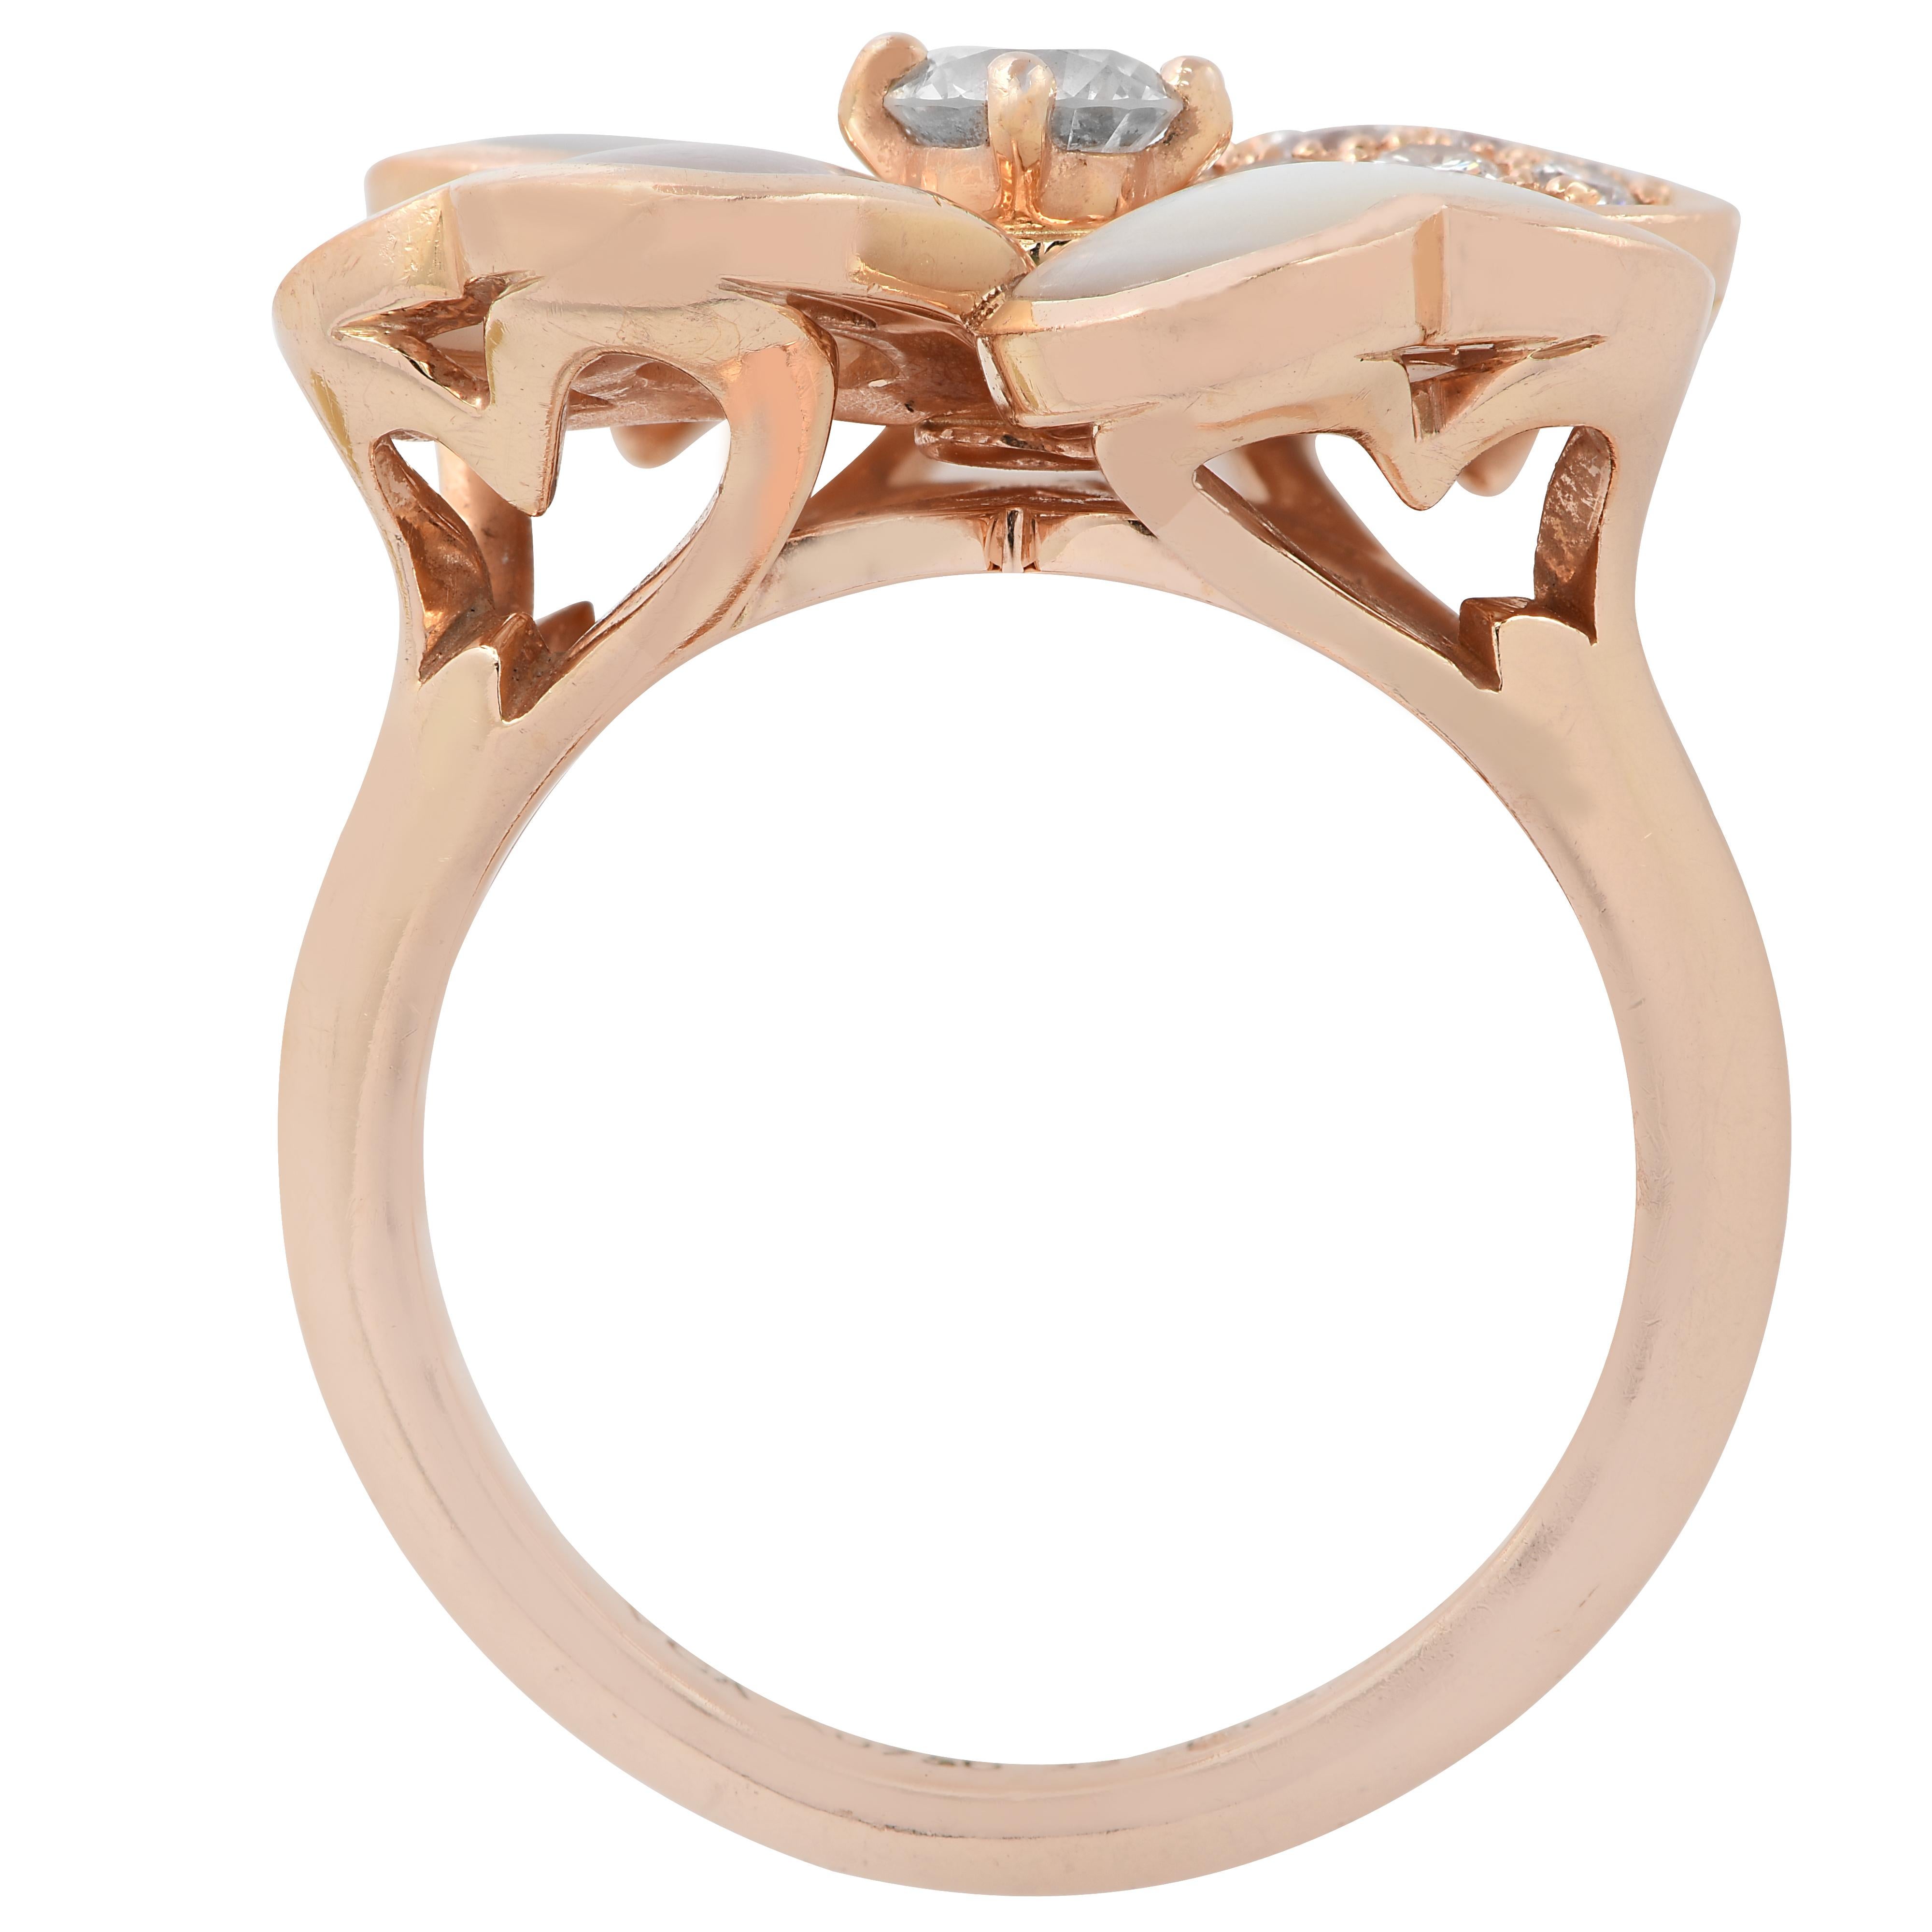 From the House of Van Cleef & Arpels, this exquisite Cosmos ring, is finely handmade in 18 karat rose gold. This stunning flower has three heart shaped petals with mother-of-pearl inlays, and one petal encrusted with 13 round brilliant cut diamonds